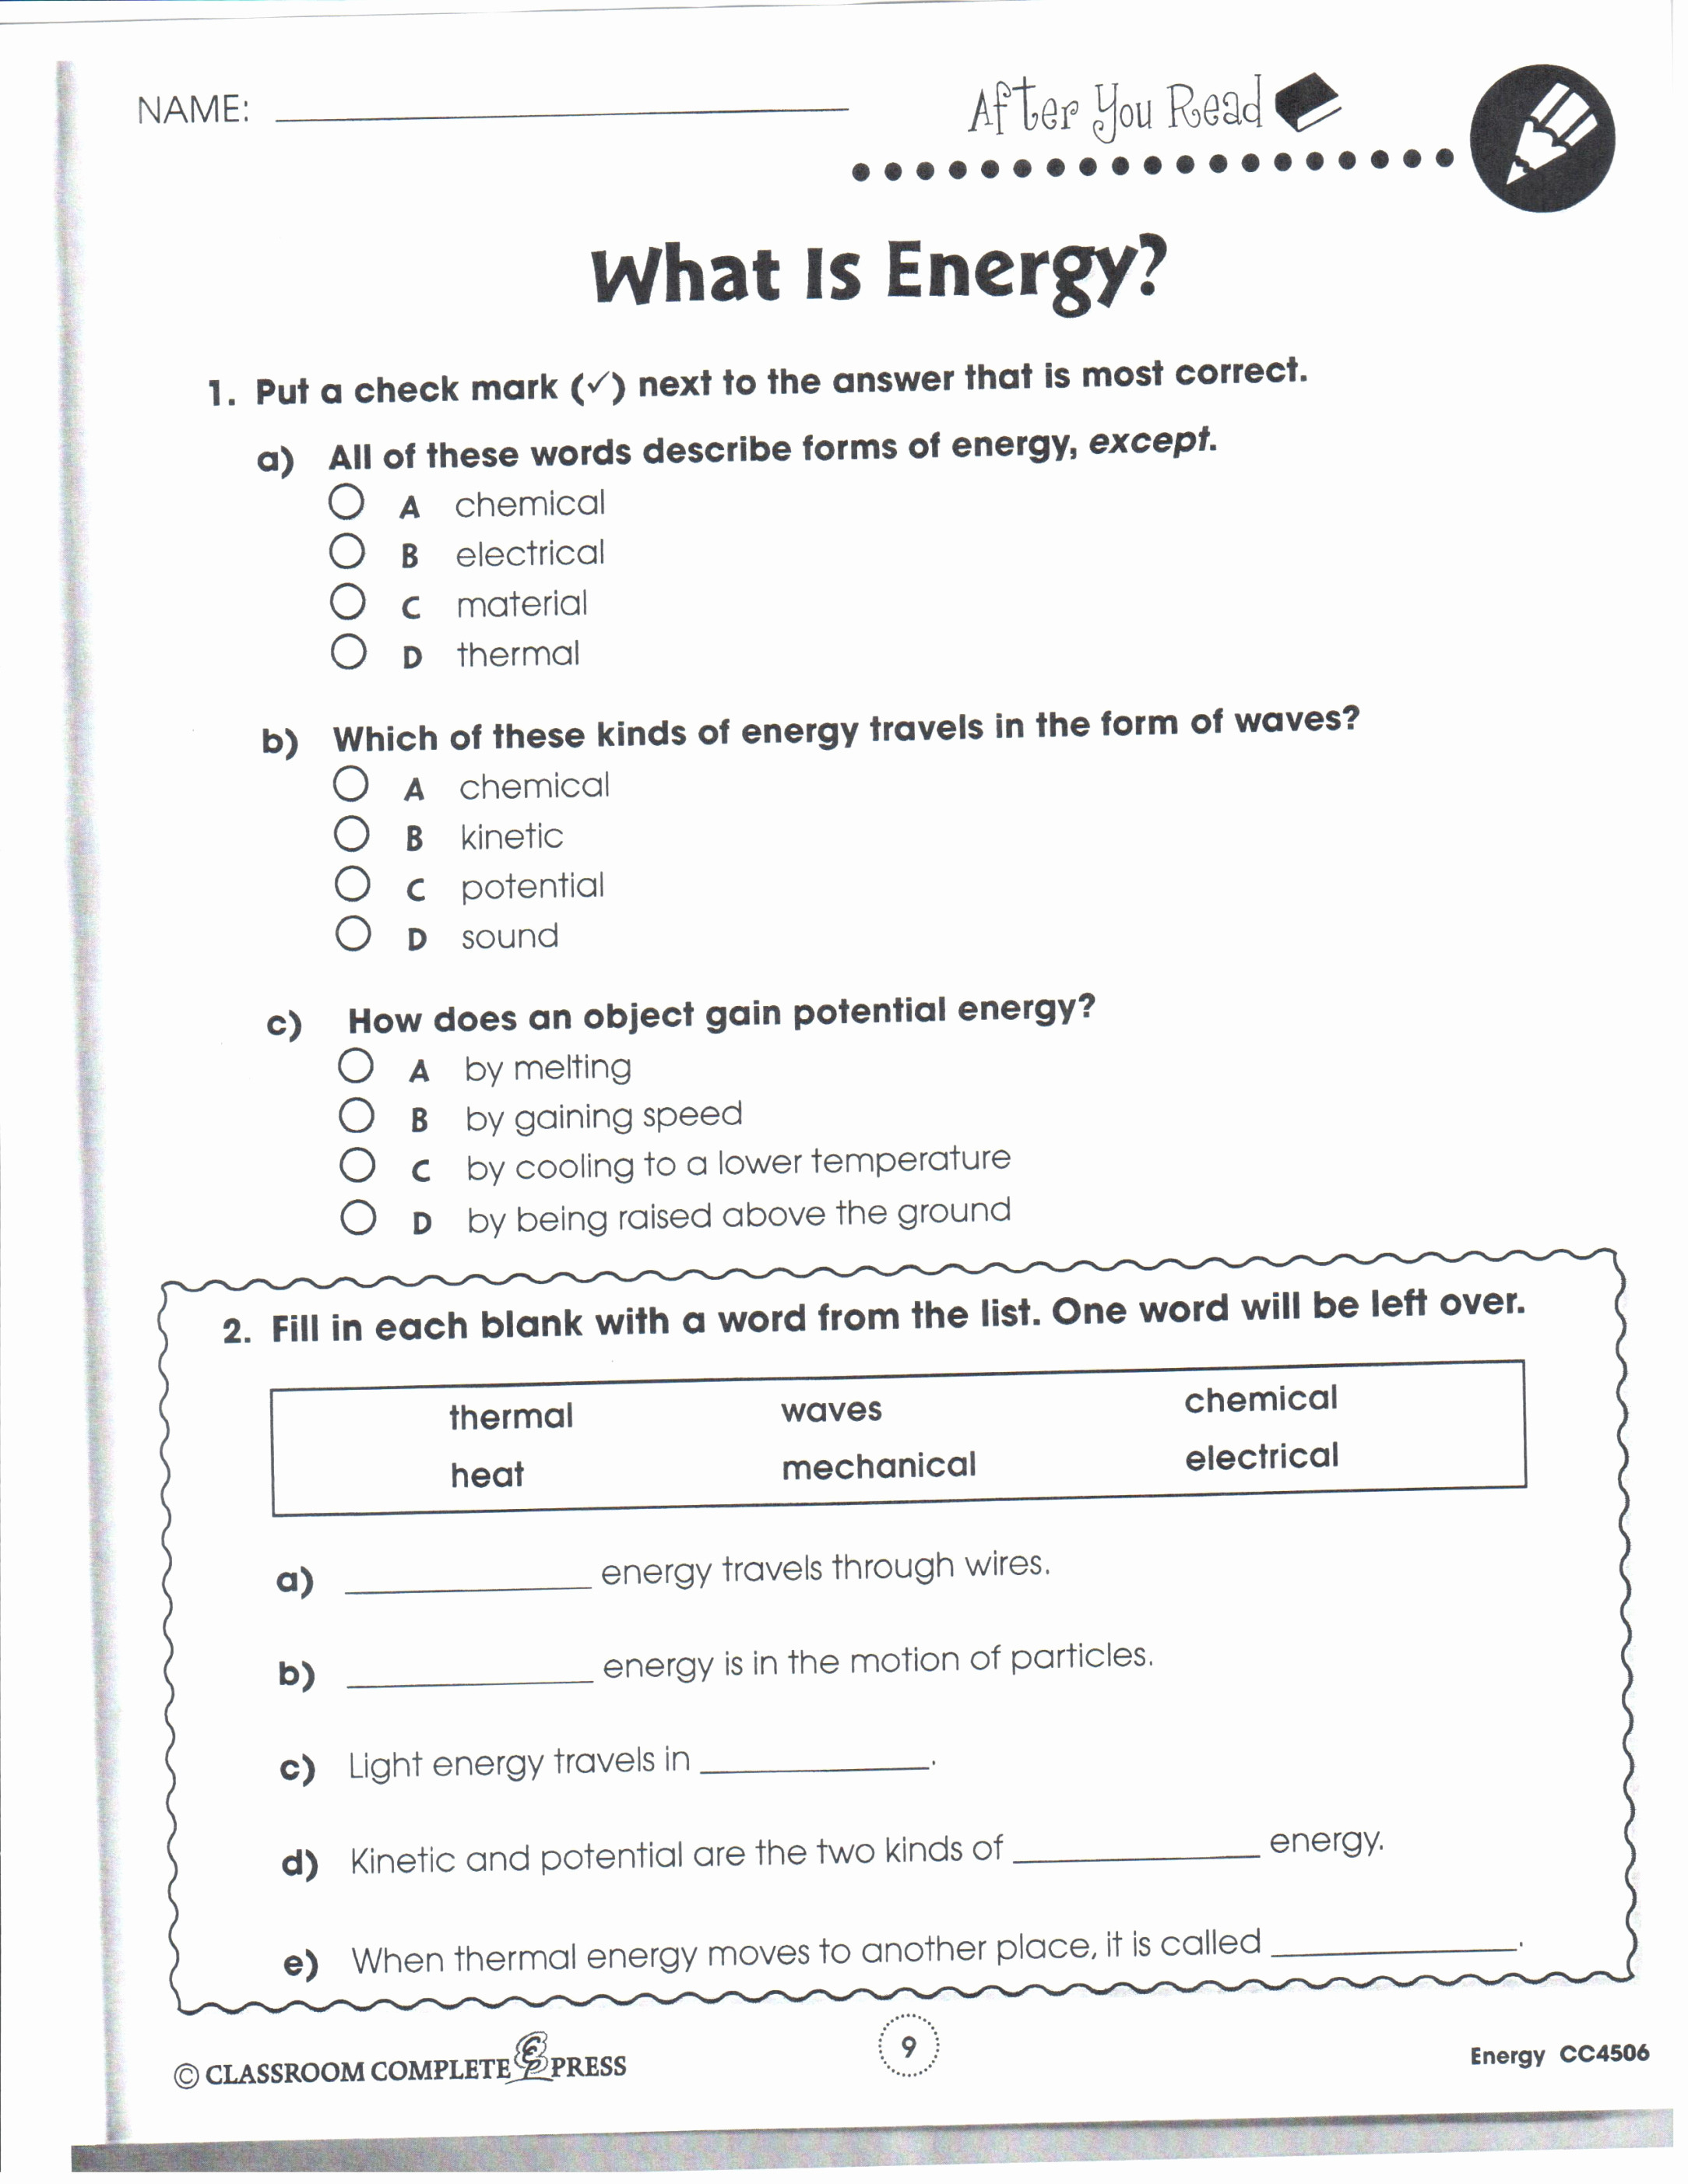 Setting Boundaries In Recovery Worksheets With Work Power